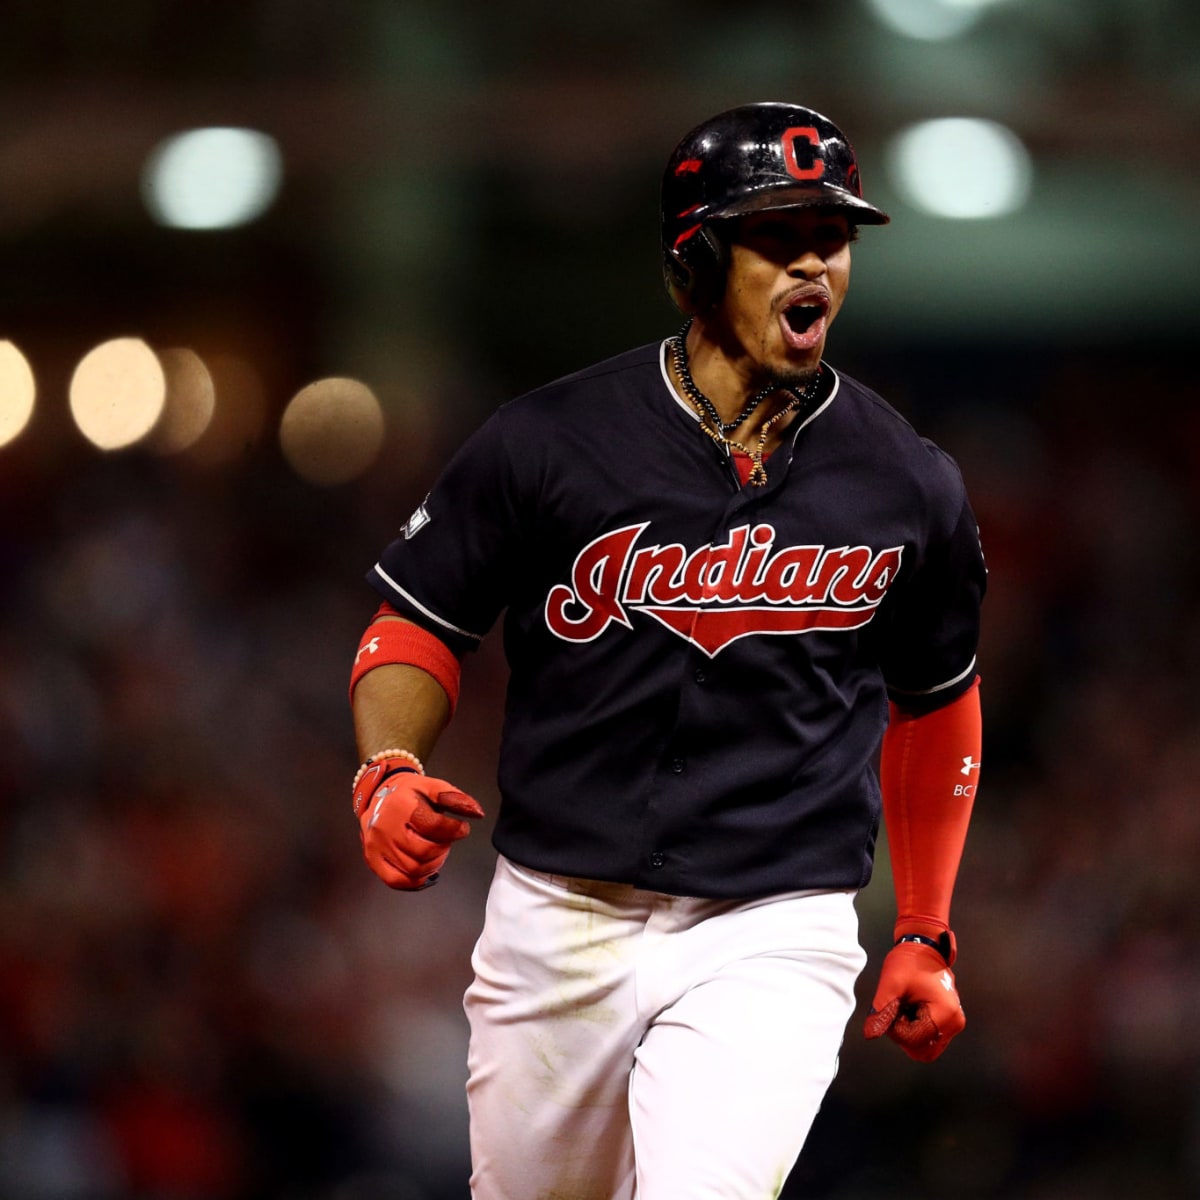 Cleveland Indians shortstop Francisco Lindor is sporting a new